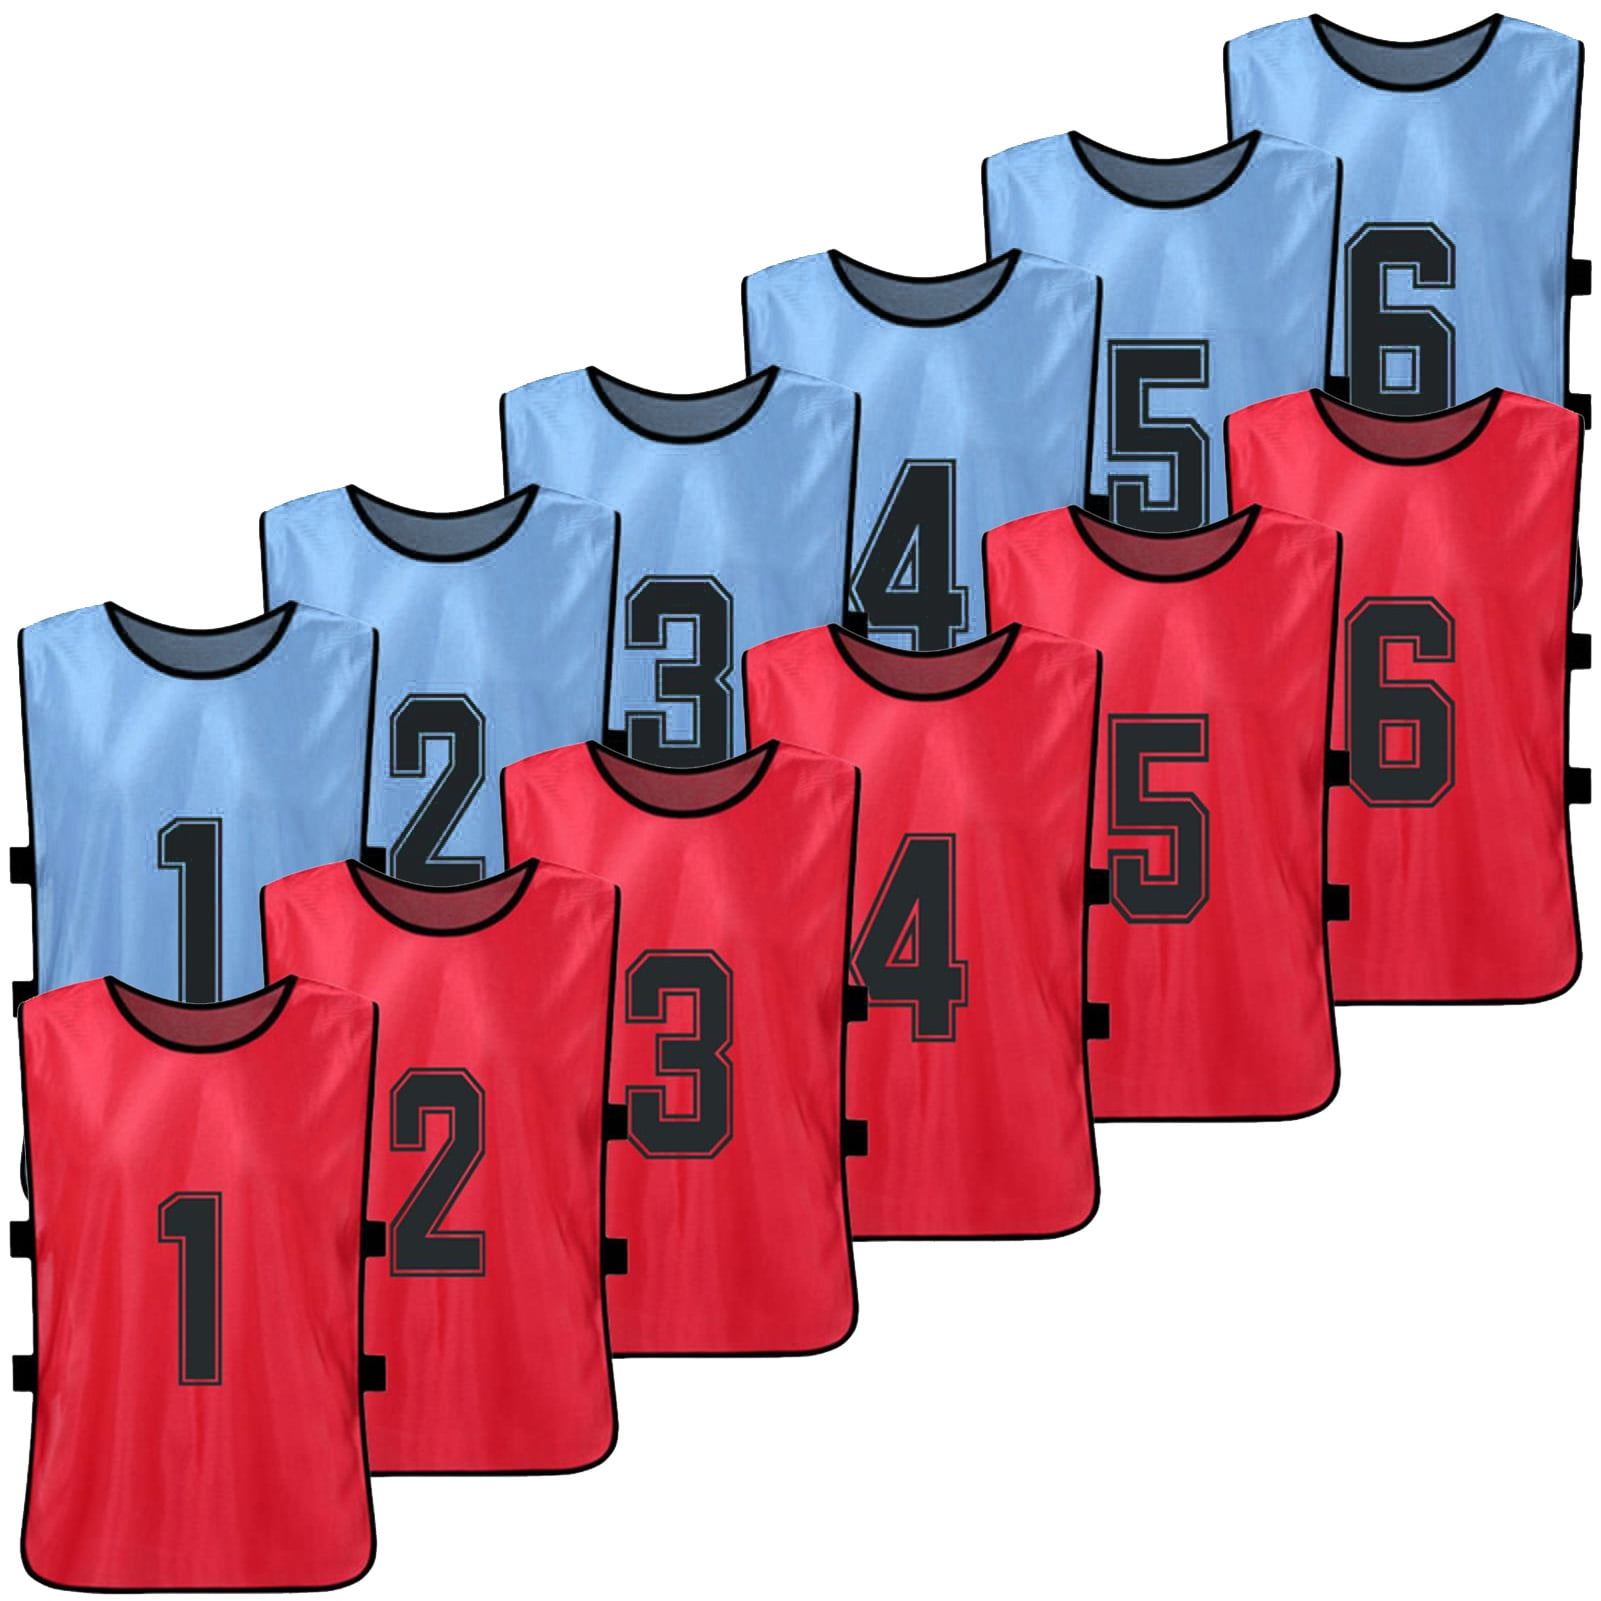 Basketball Soccer Training Vest Team Scrimmage Practice Jersey Set of 6&12 +Free Carry Bag Athllete Reversible Pinnies 